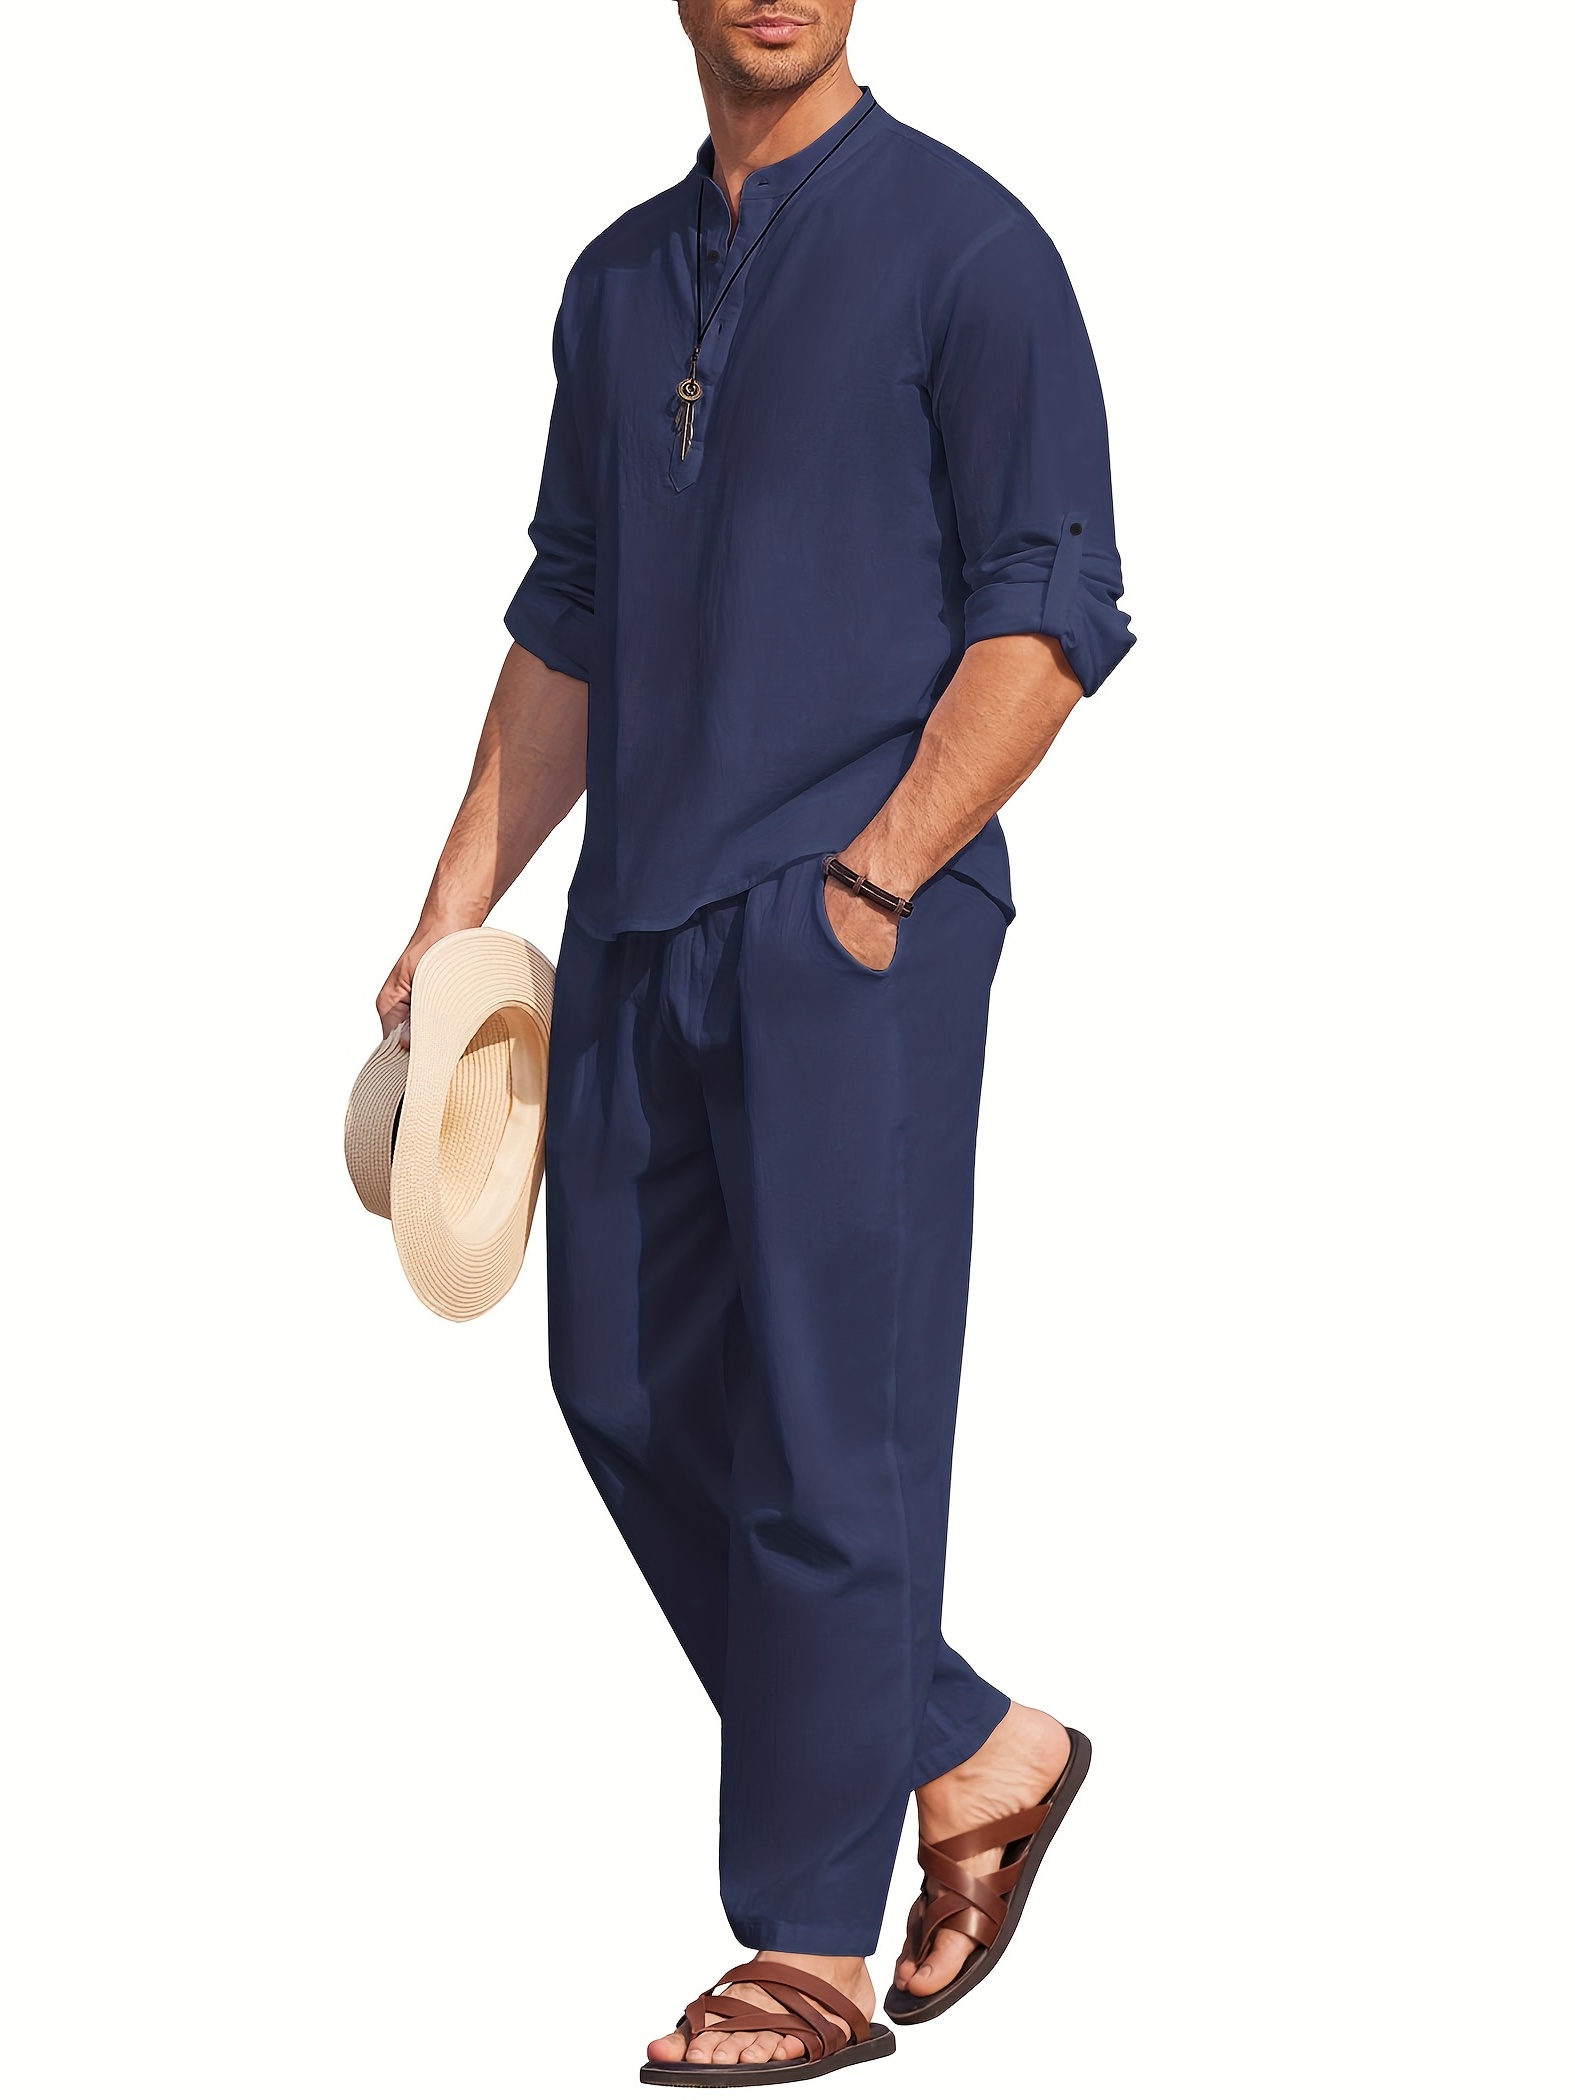 Navy Long Sleeve Shirt with Tan Linen Pants Outfits For Men (10 ideas &  outfits)